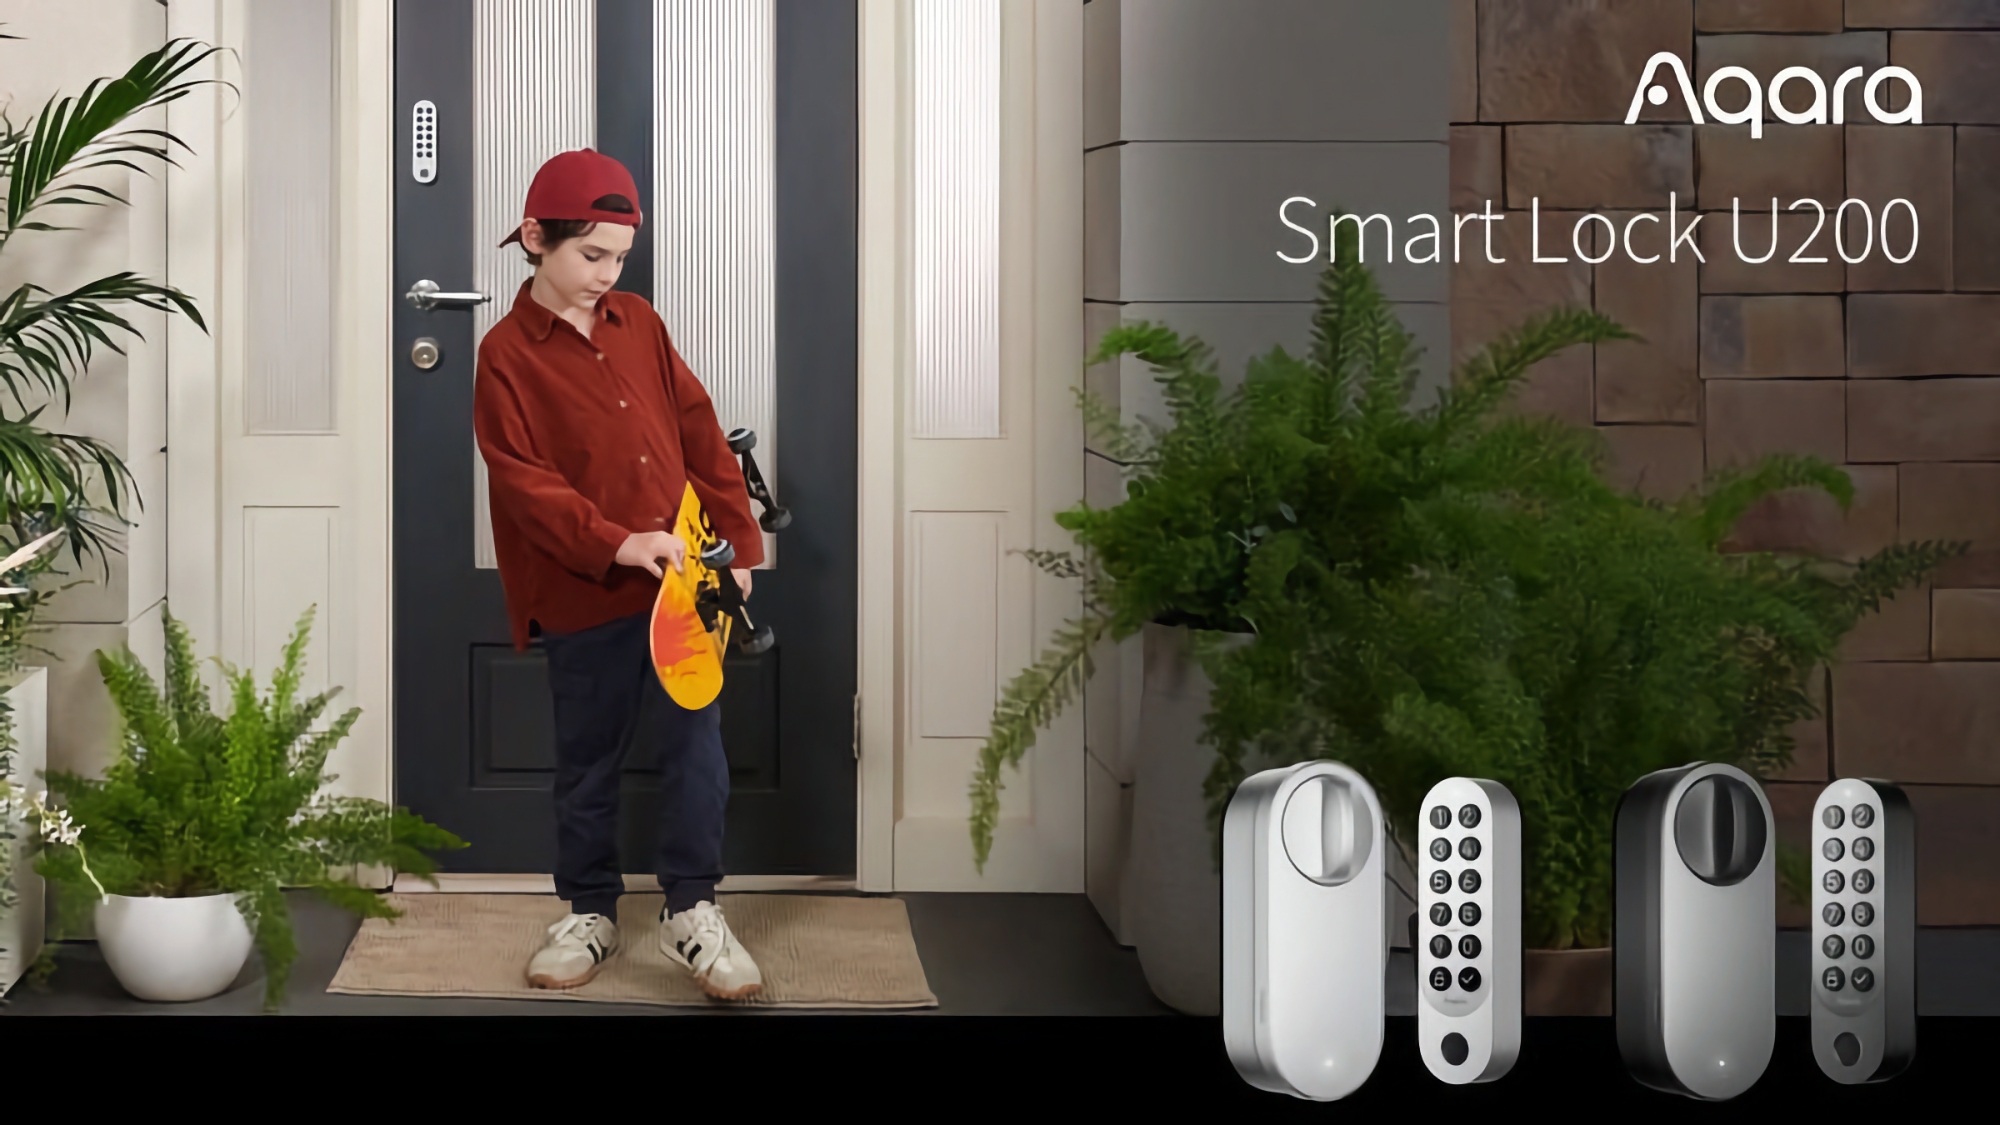 Aqara has introduced Smart Lock U200, which can be opened with iPhone and Apple Watch